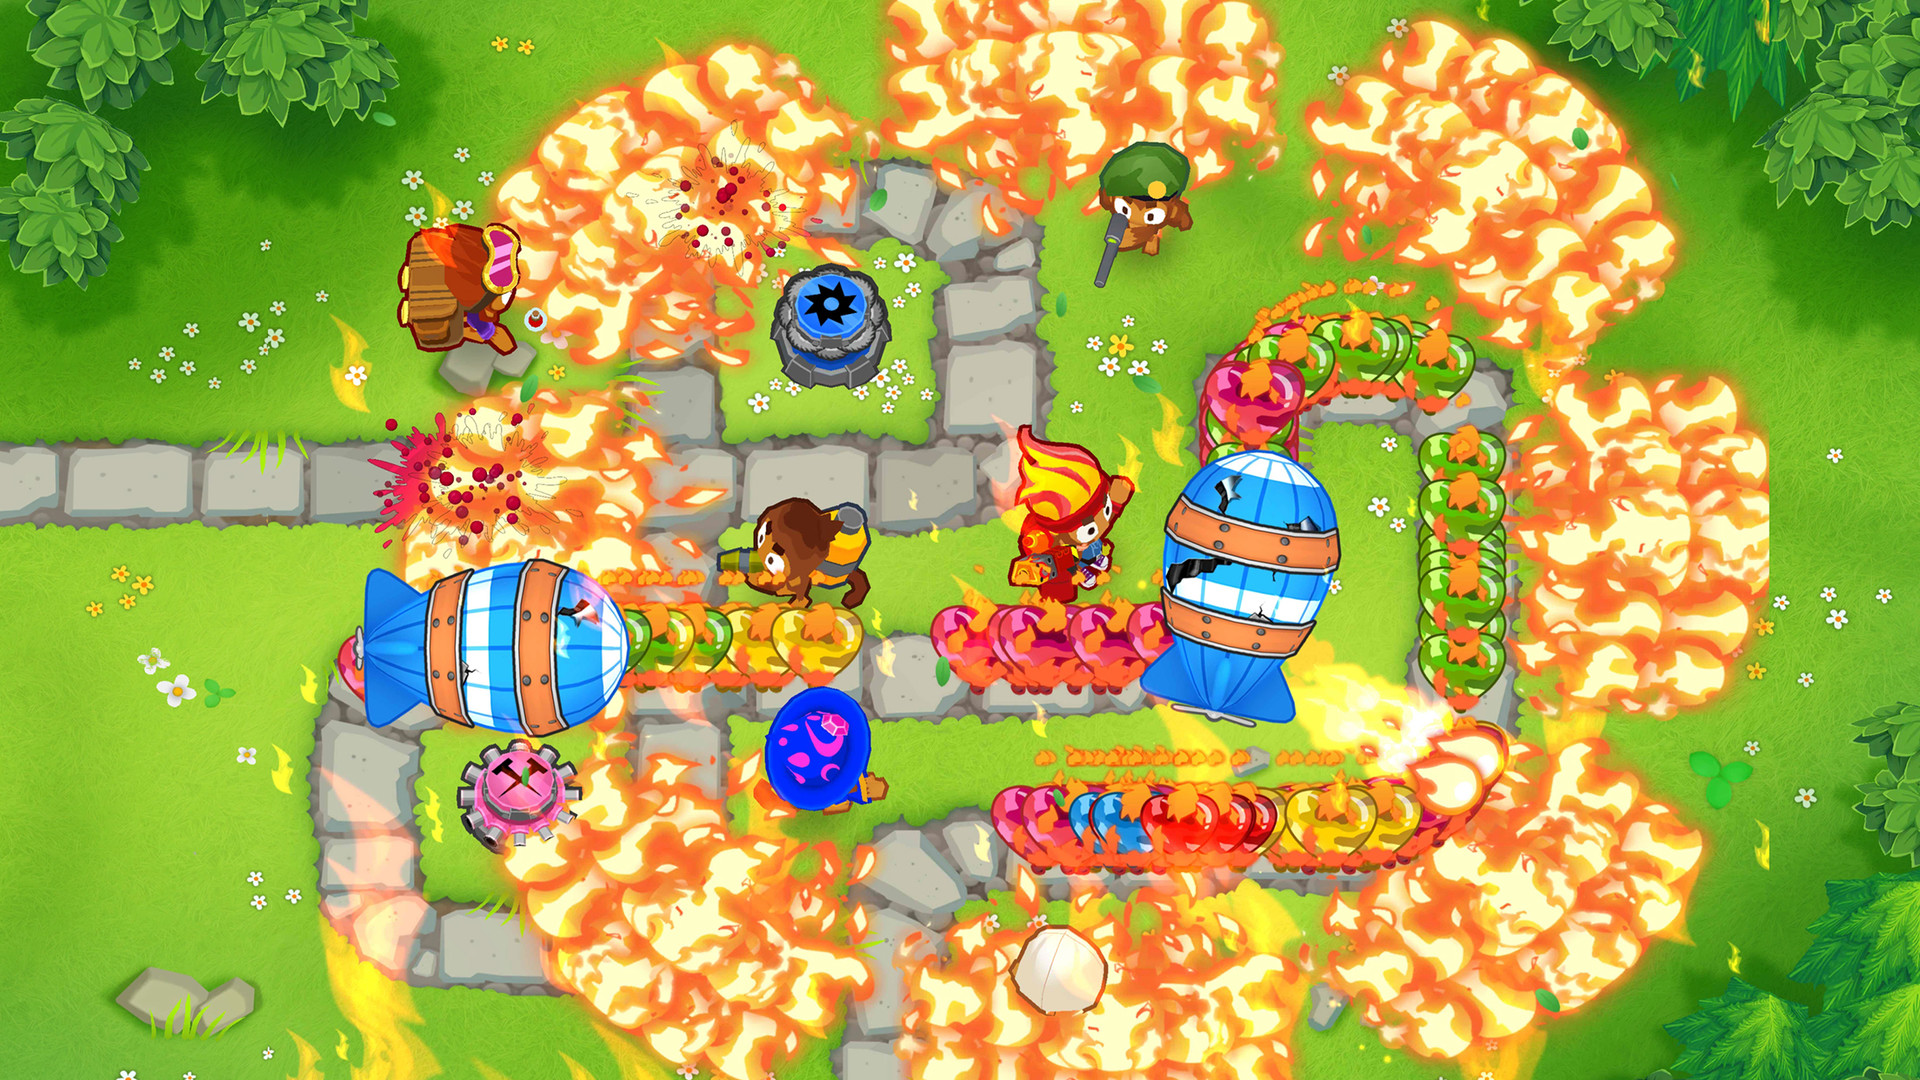 Best mobile strategy games: Bloons TD 6. Image shows characters walking around in a field and doing battle, all seen from a top down perspective.